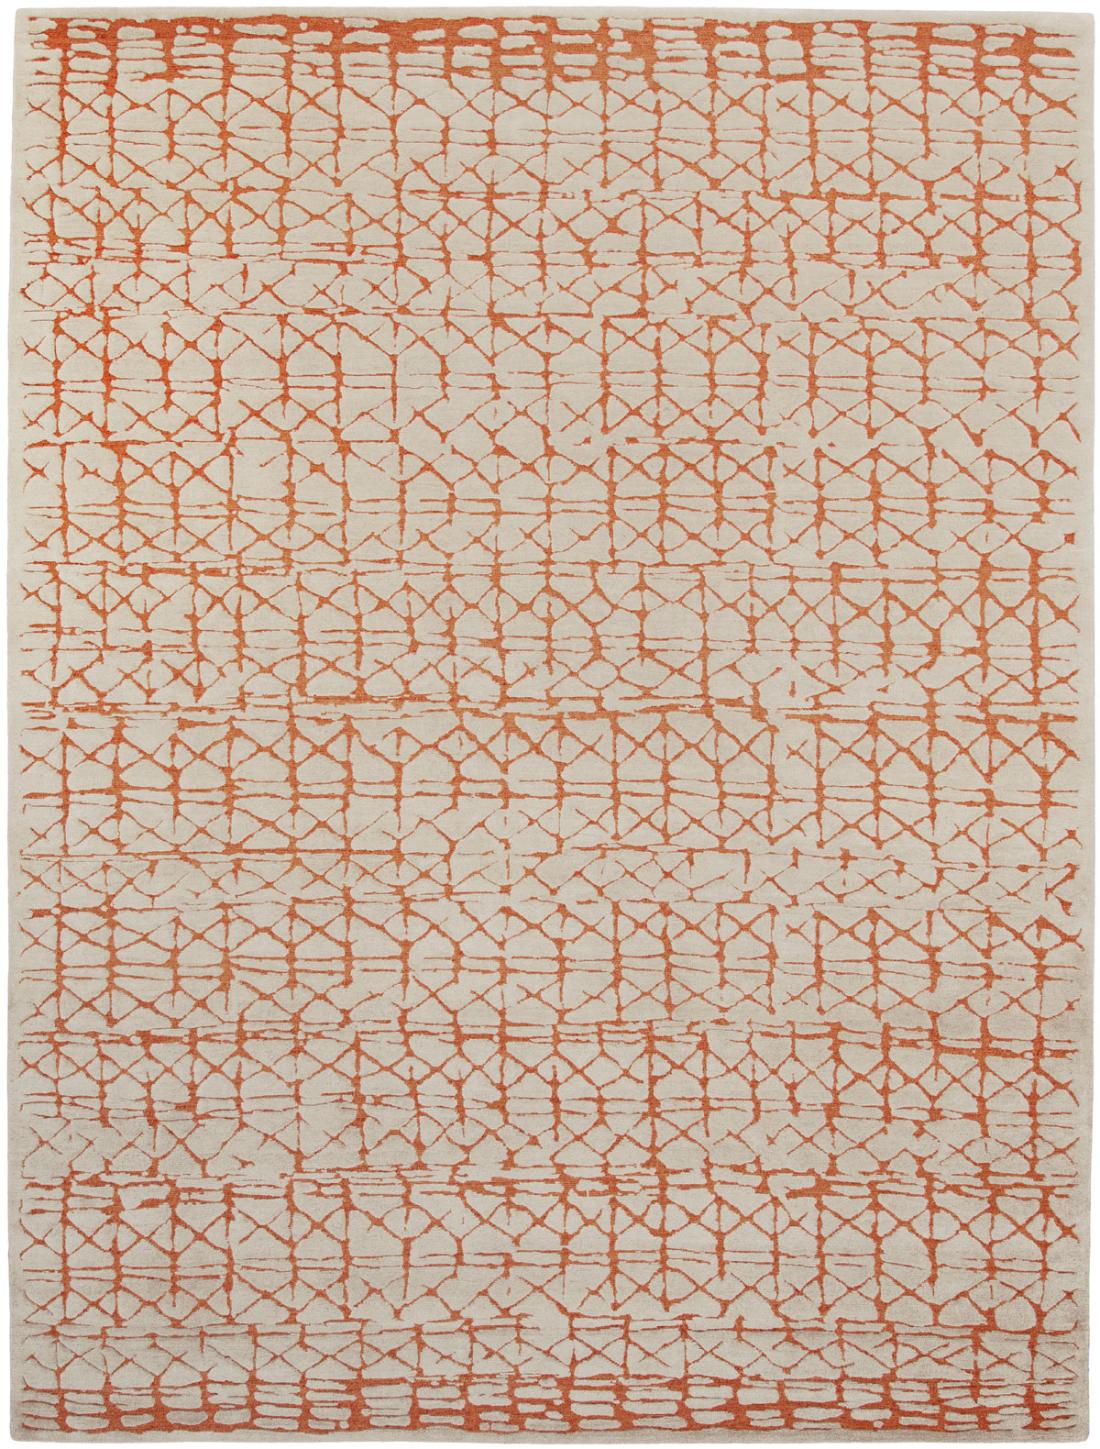 Naaba Designer Hand-Knotted Rug